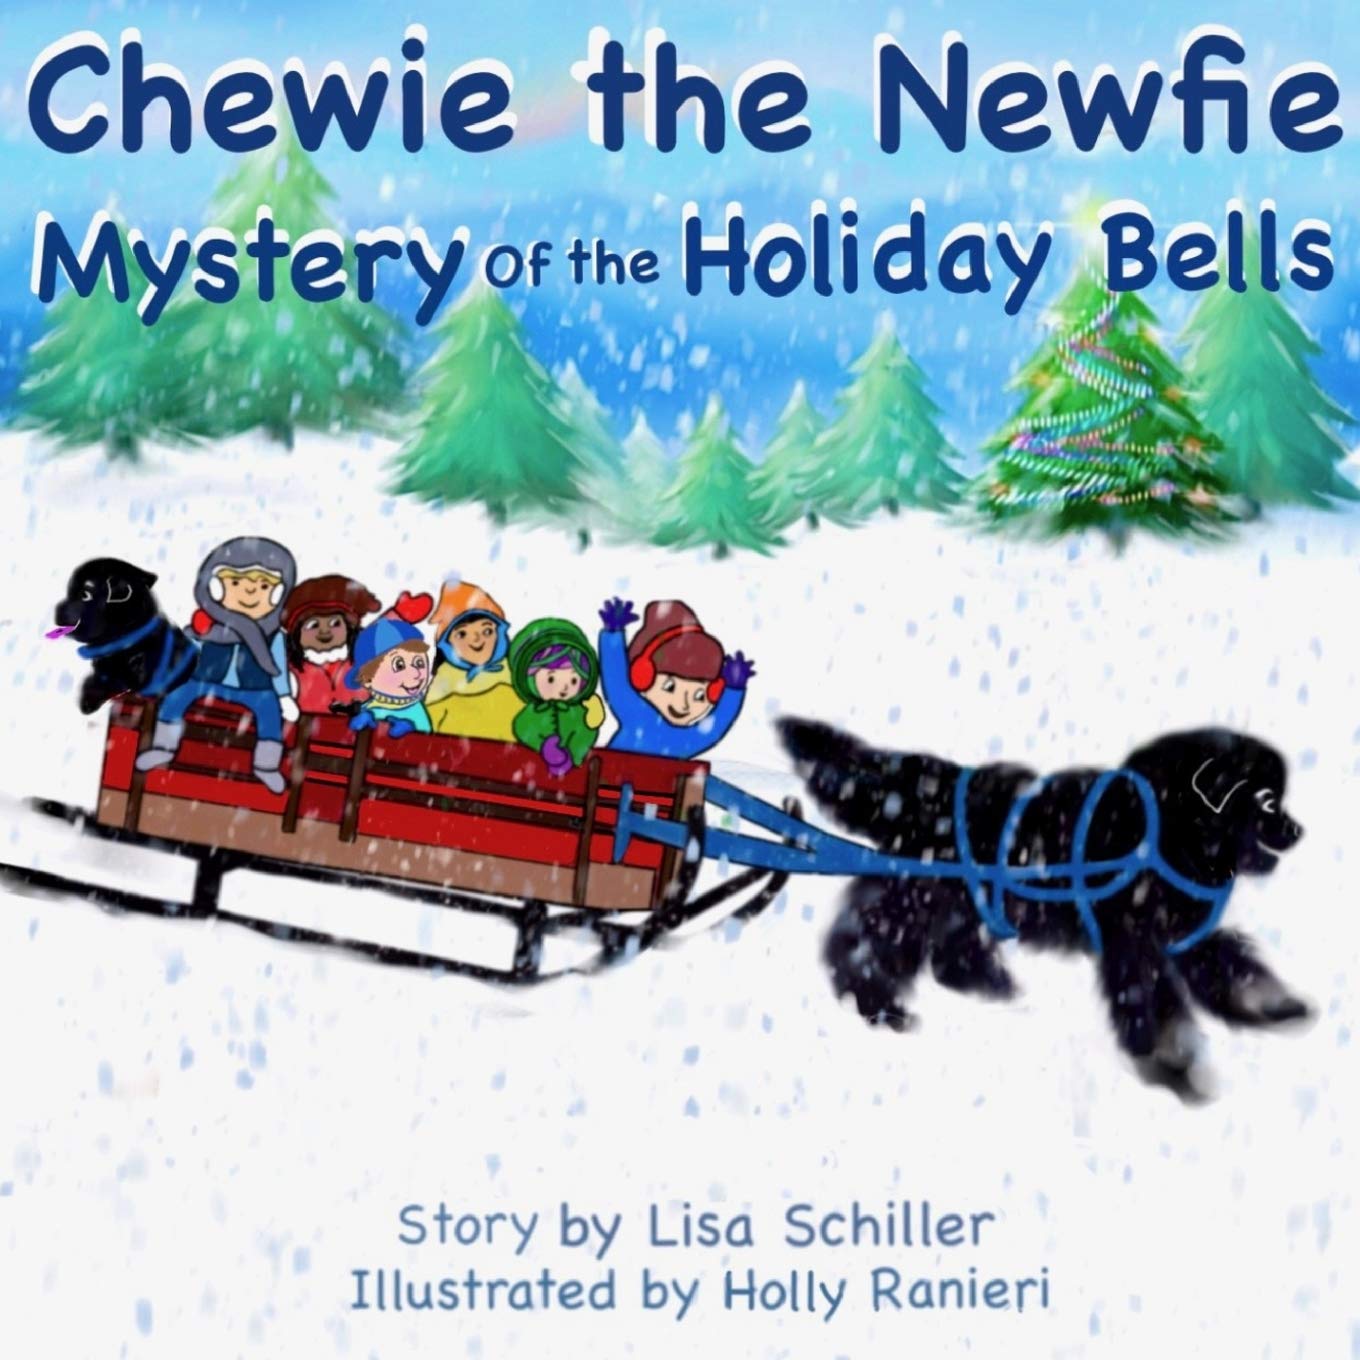 Chewie the Newfie: Mystery of the Holiday Bells